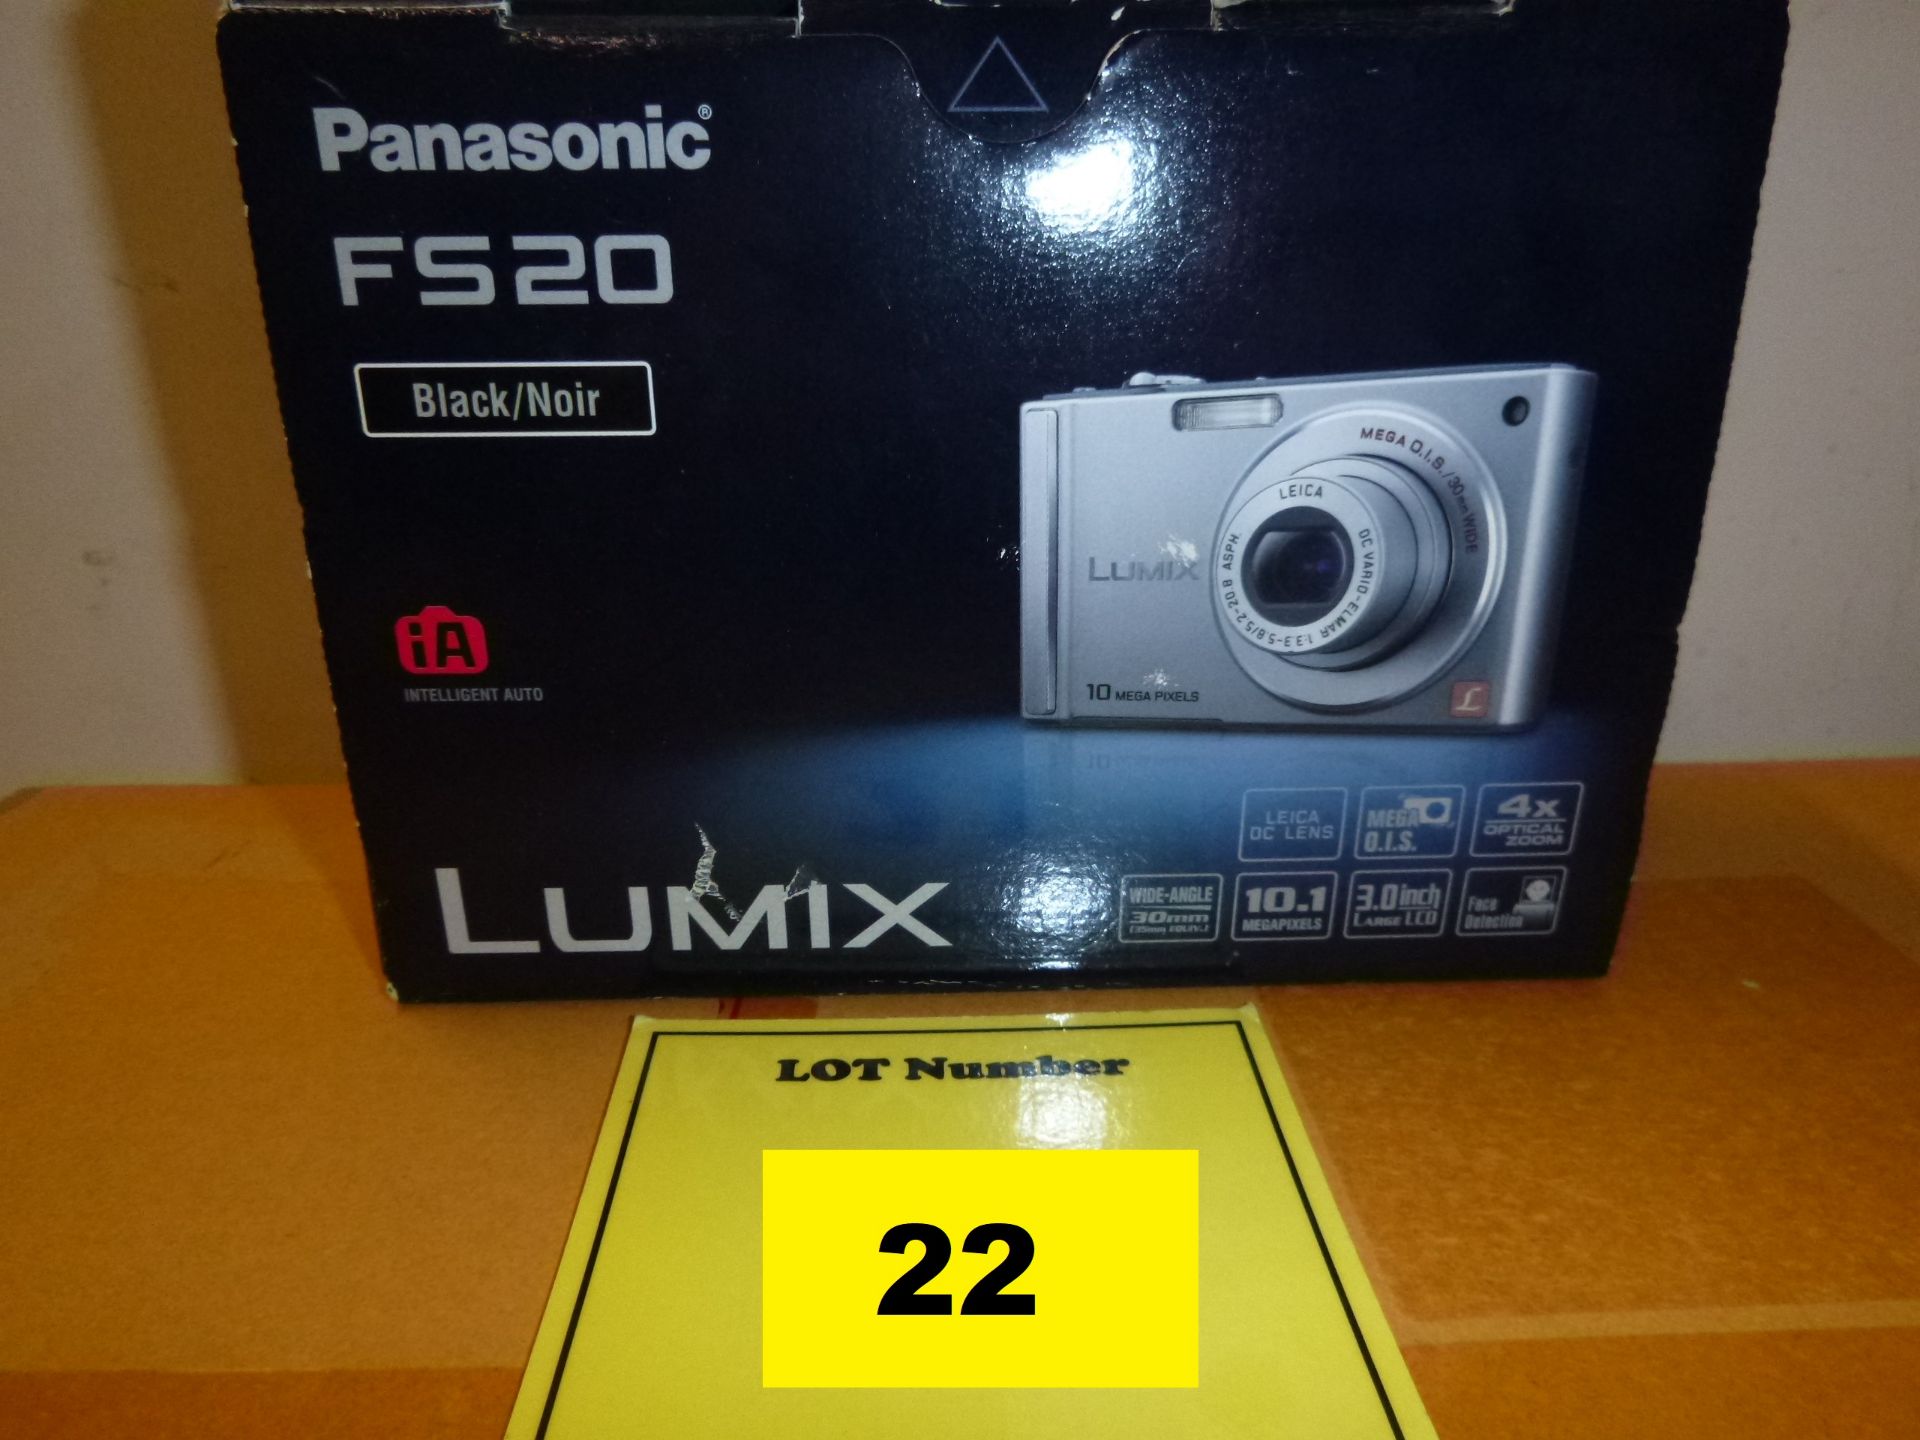 PANASONIC LUMIX FS20 DIGITAL CAMERA. BOXED WITH INSTRUCTION BOOK, BATTERY, CHARGER AND CABLES